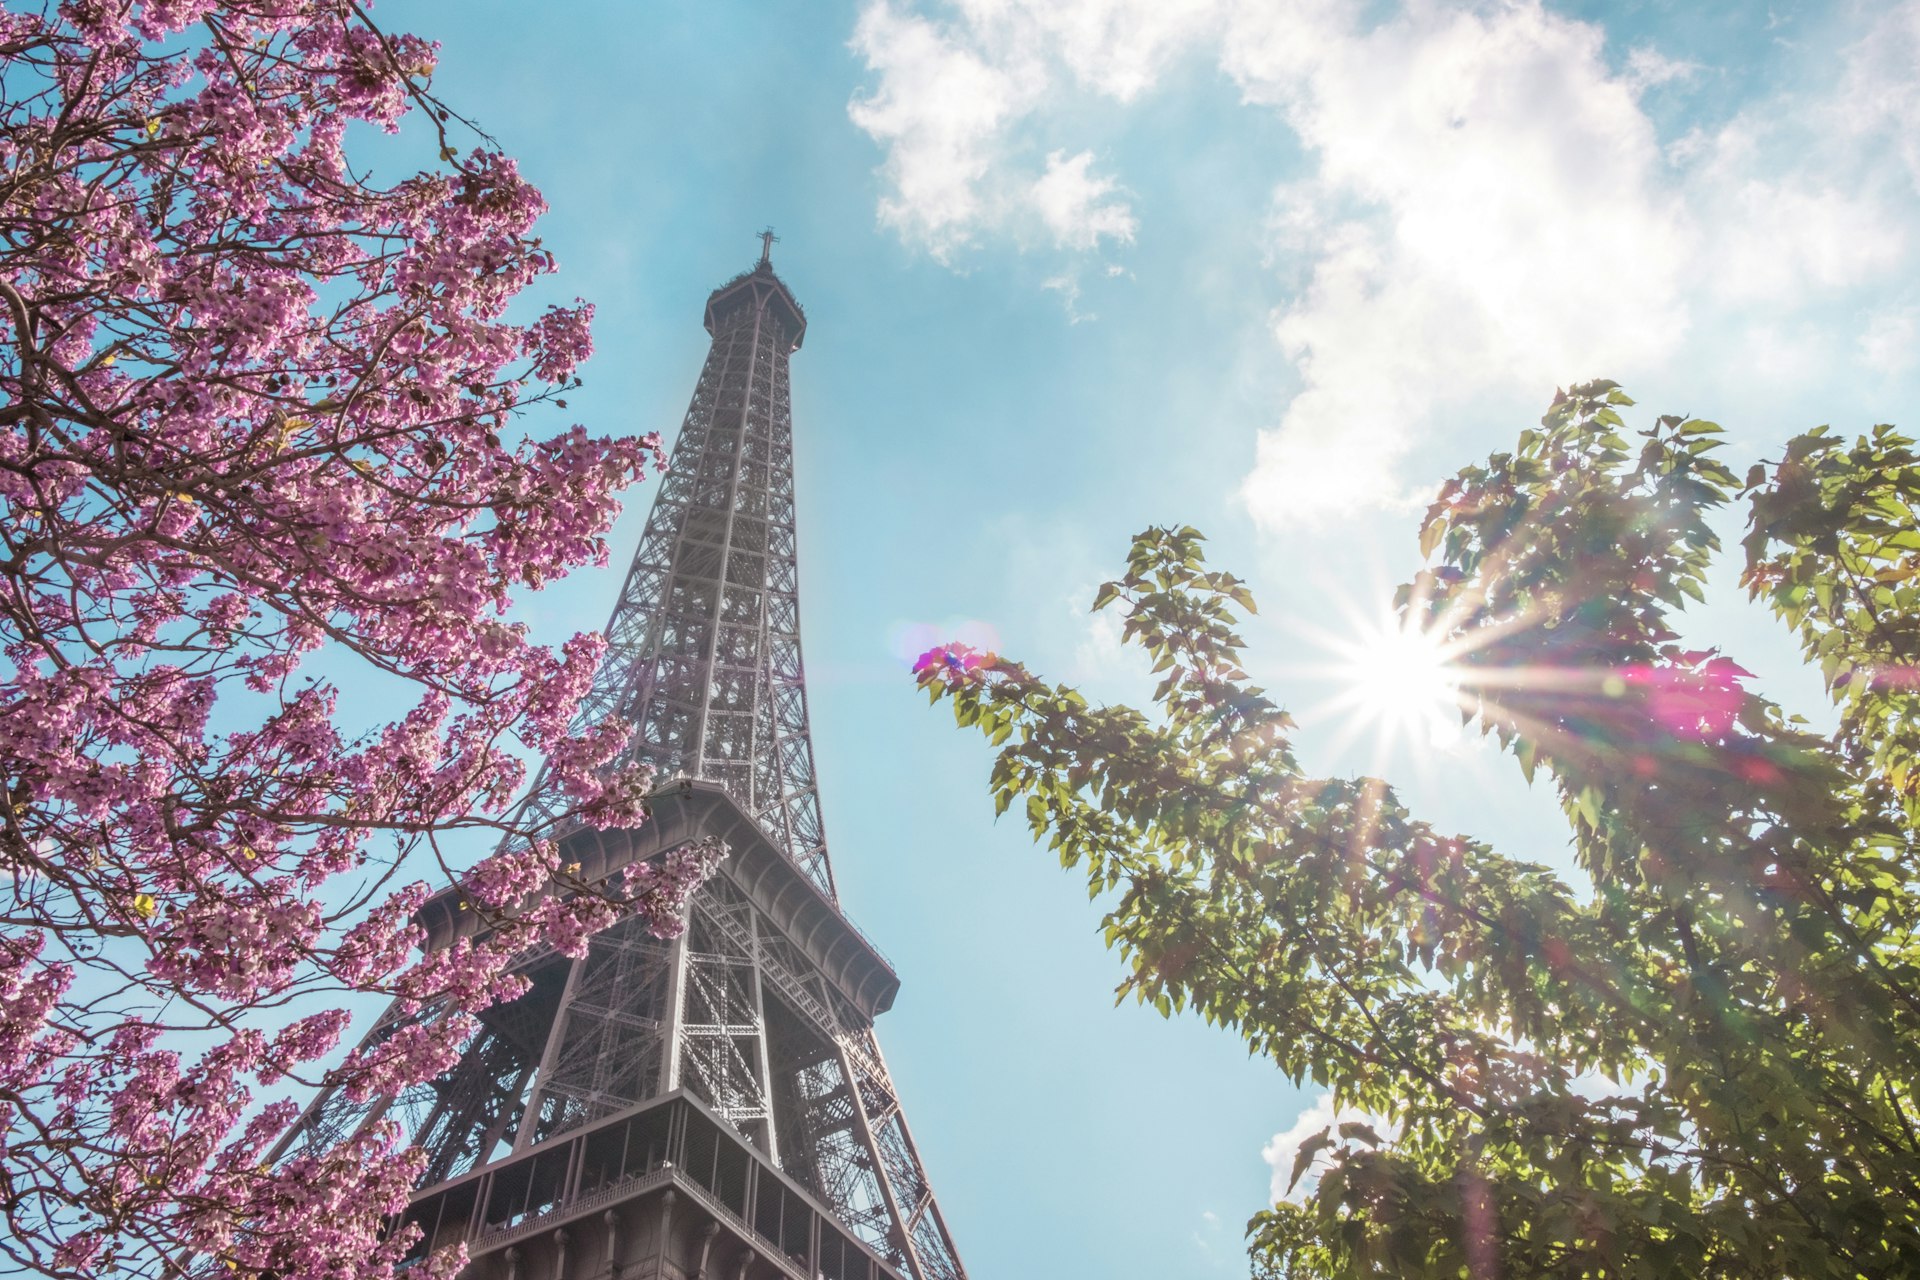 A blossom tree in full bloom in the sunshine, with a tall metal tower, the iconic Eiffel Tower, rising above